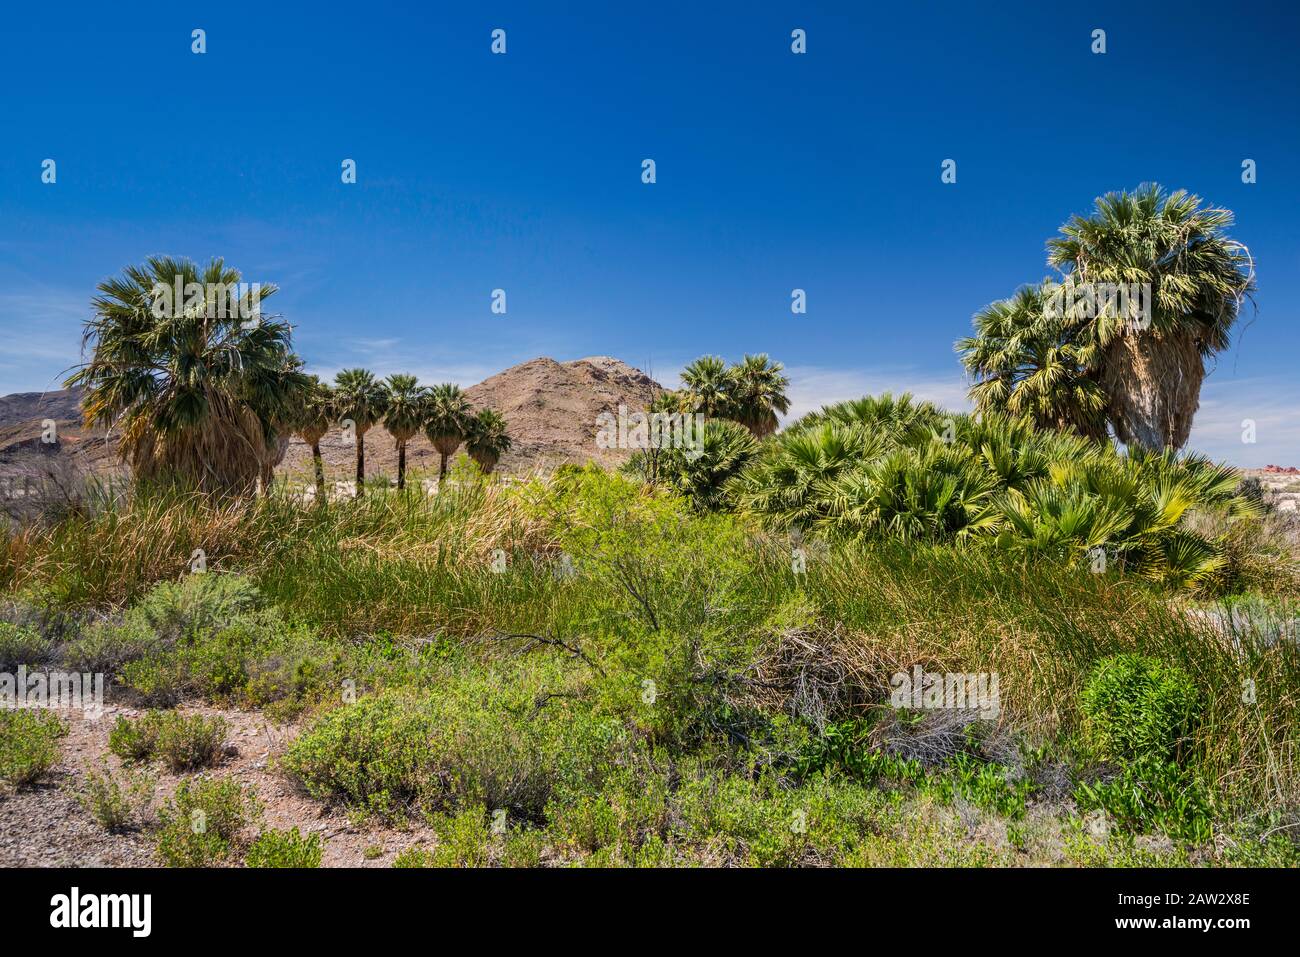 Palm trees at Blue Point Spring, geothermal hot spring oasis near Northshore Road, Lake Mead National Recreation Area, Nevada, USA Stock Photo